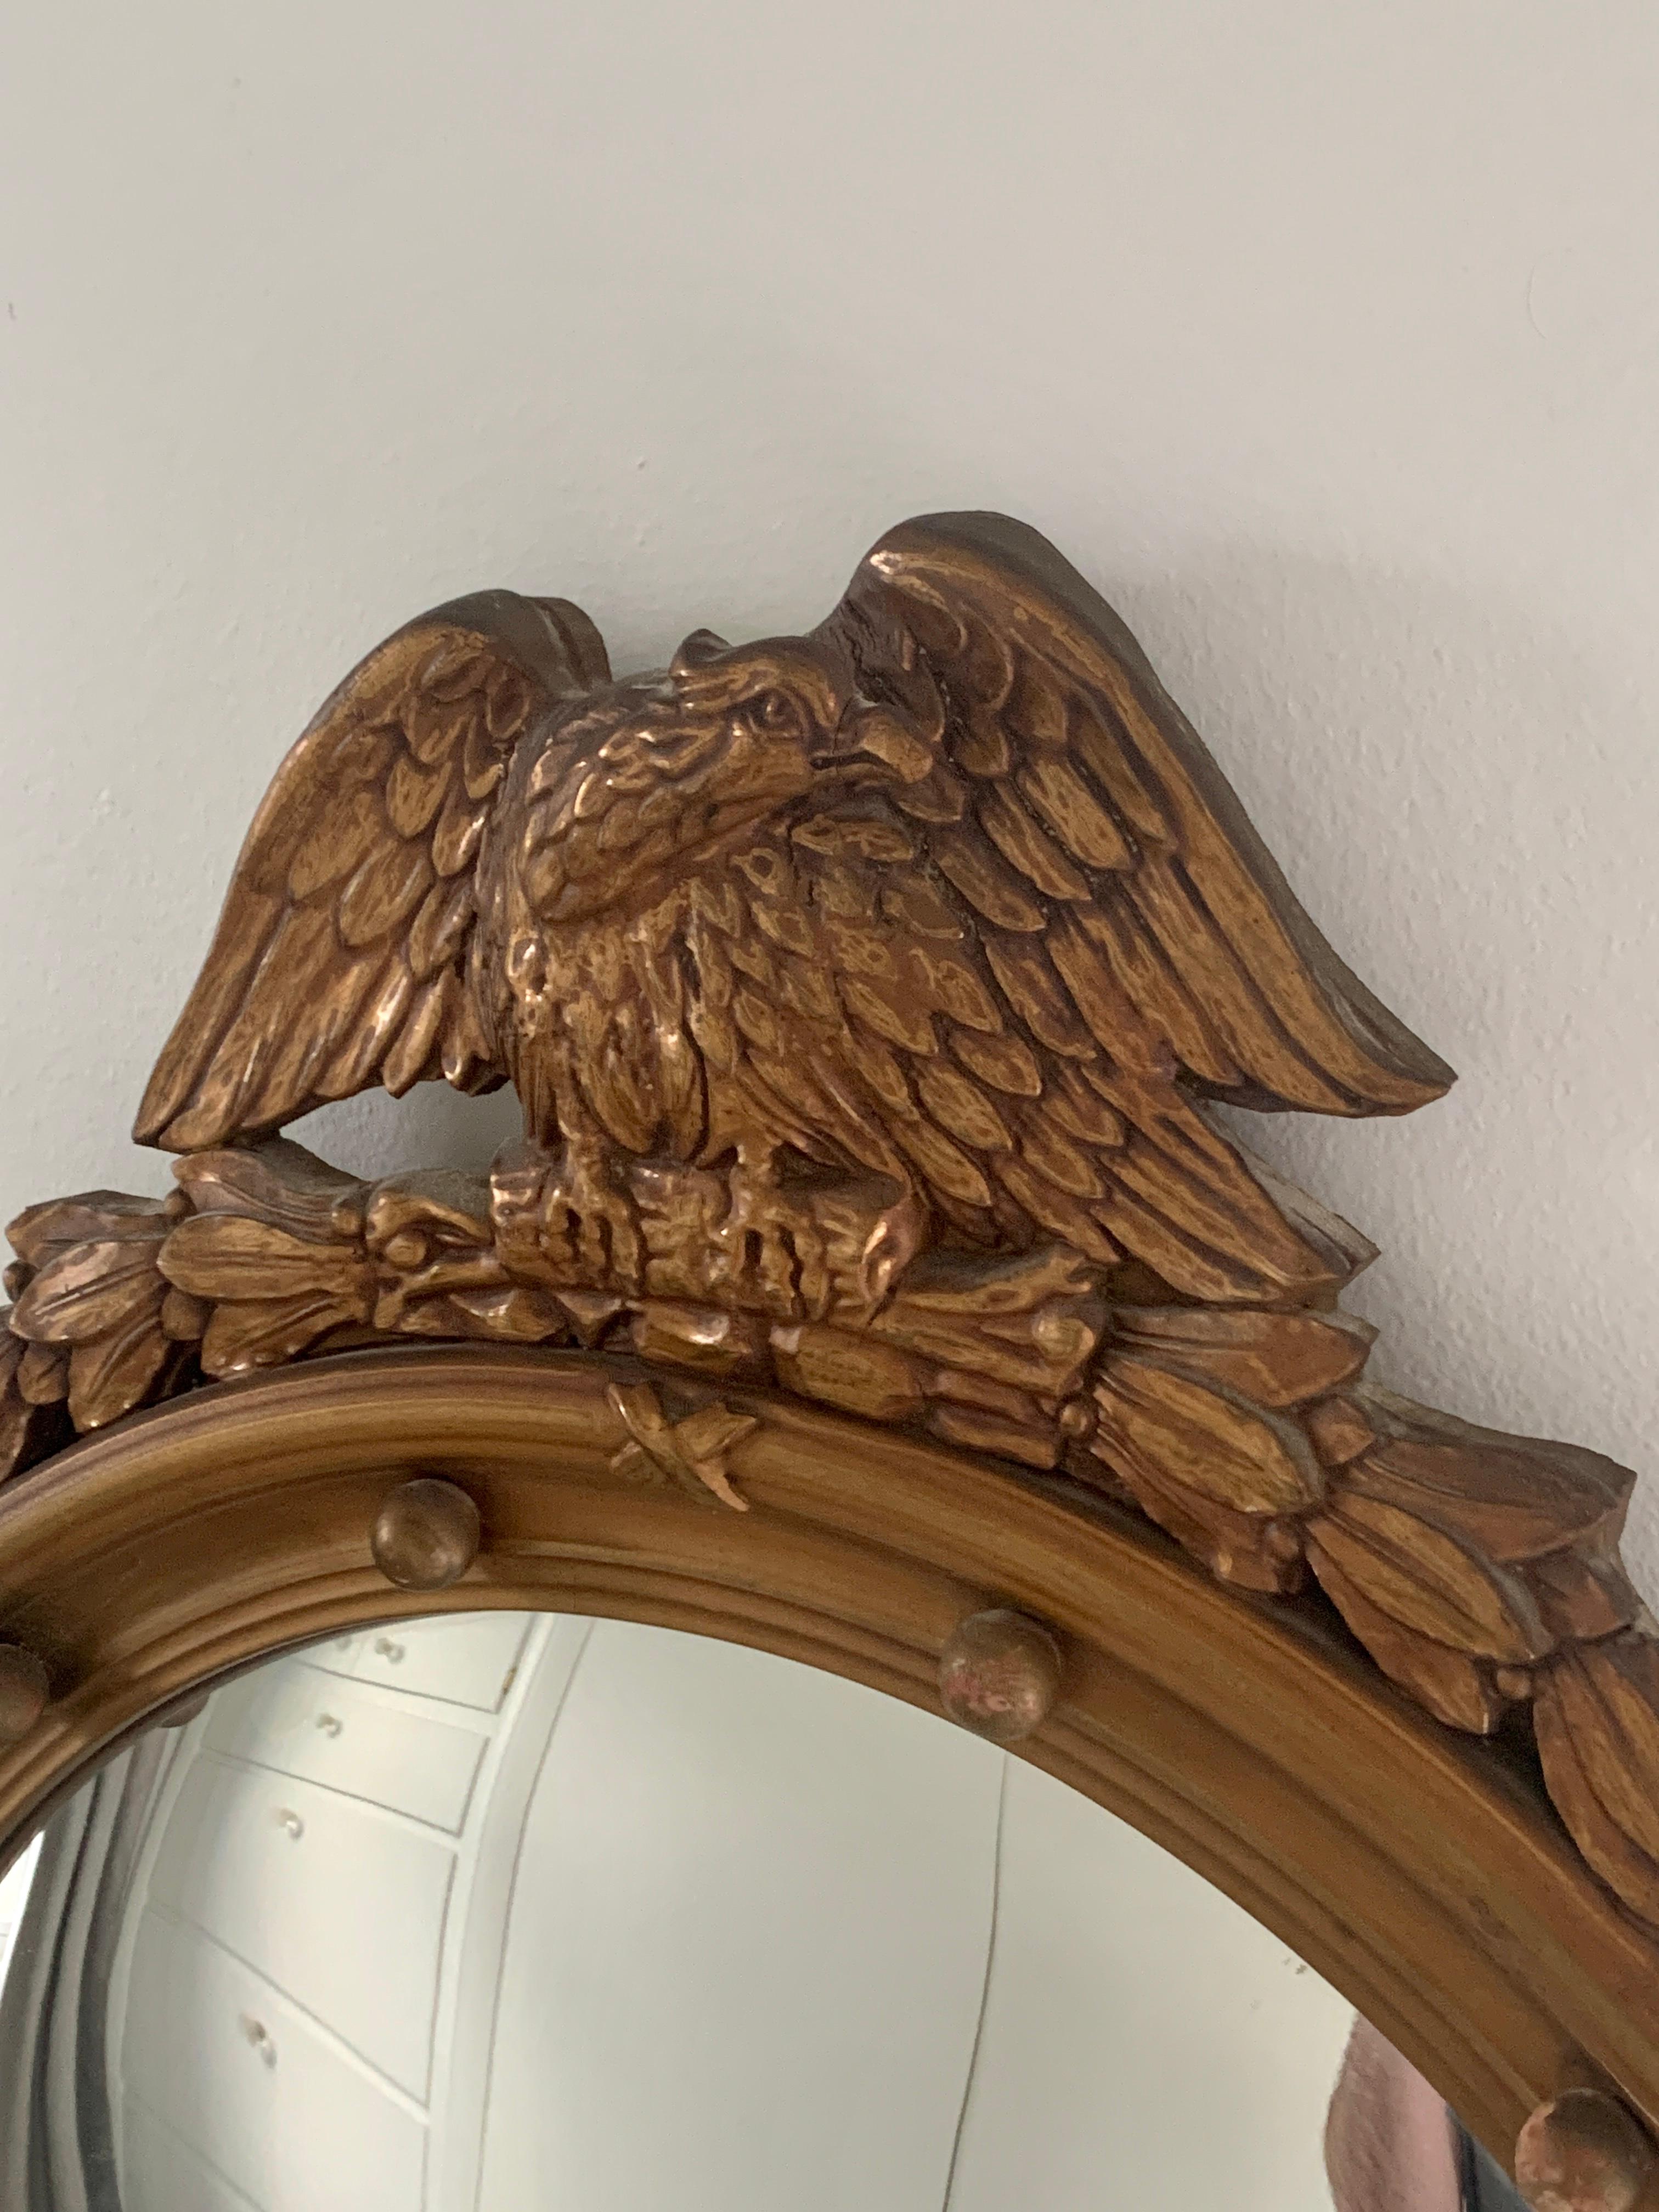 A gorgeous Federal or Regency style convex bullseye wall mirror featuring a carved eagle with open wings standing on olive branches and 13 small spheres representing the original 13 colonies around the inside perimeter.

USA, Late 19th